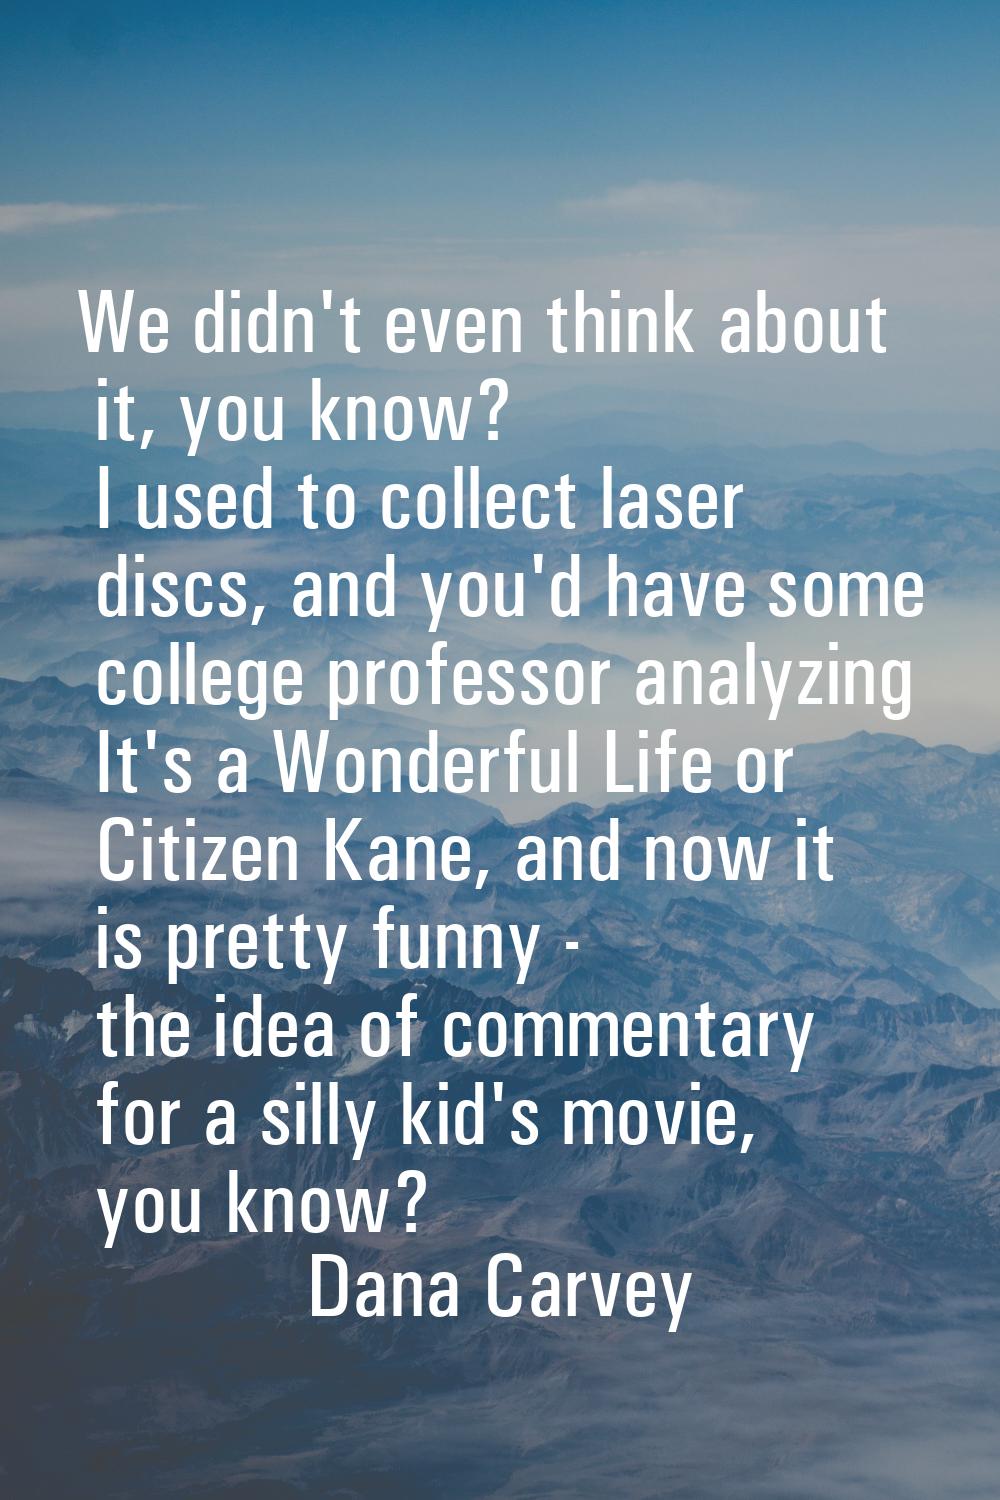 We didn't even think about it, you know? I used to collect laser discs, and you'd have some college